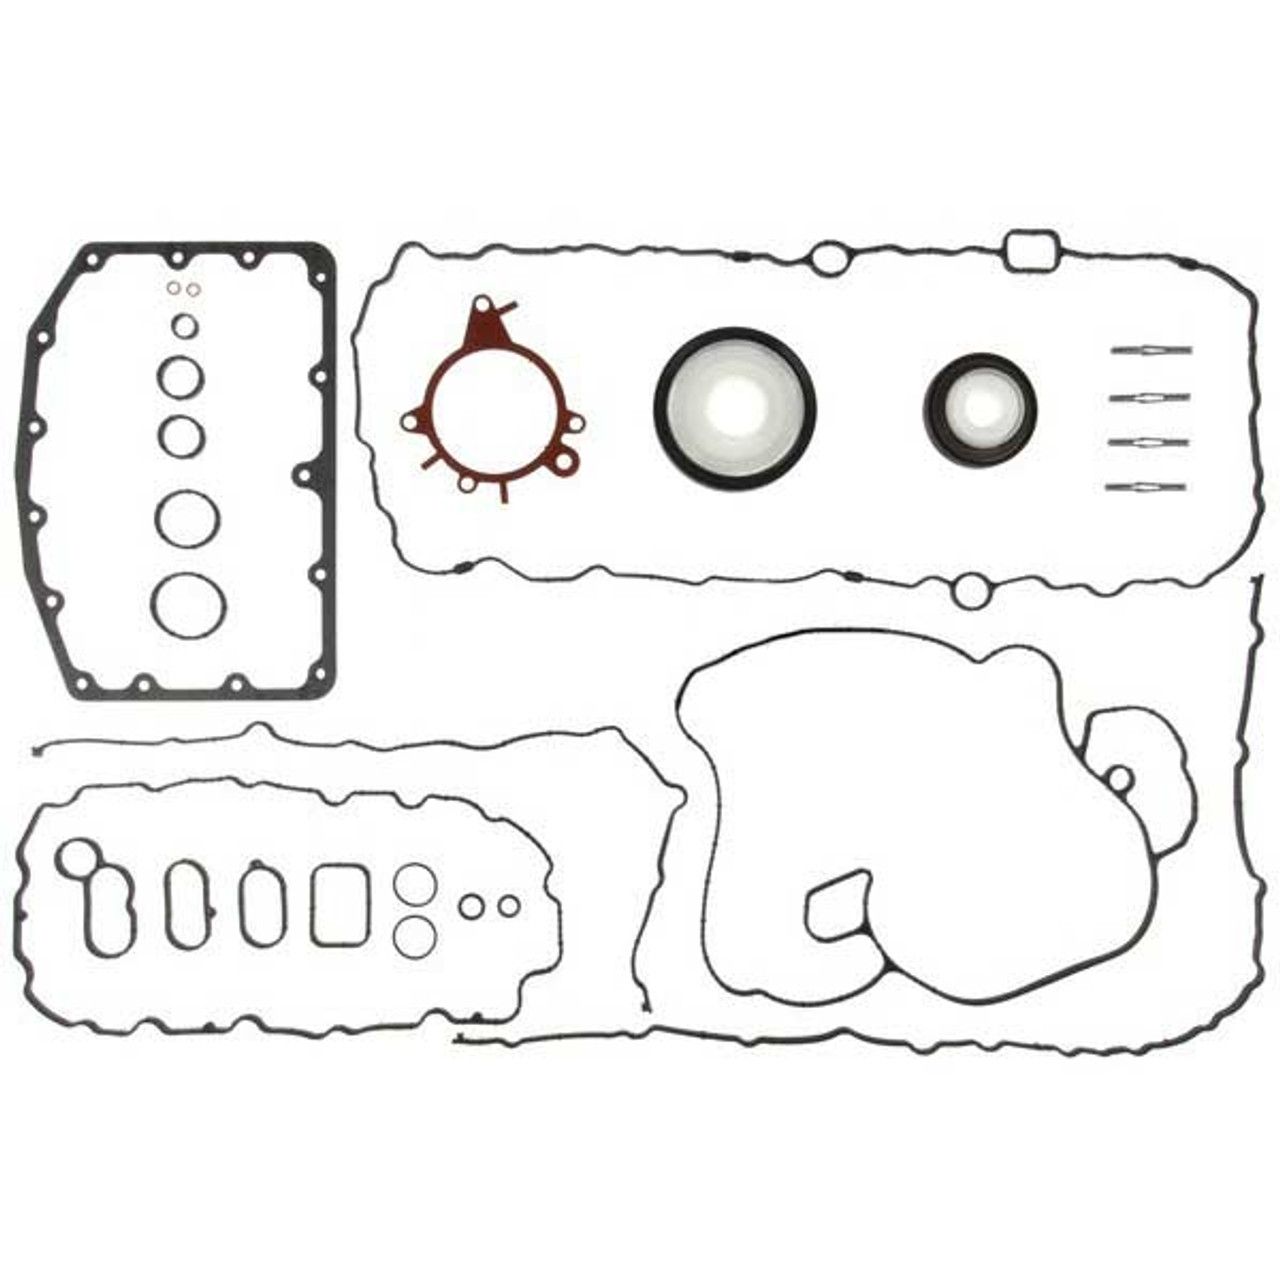 Mahle Lower Engine Gasket Set 2011 to 2014 6.7L Powerstroke (MCICS54886)-Main View